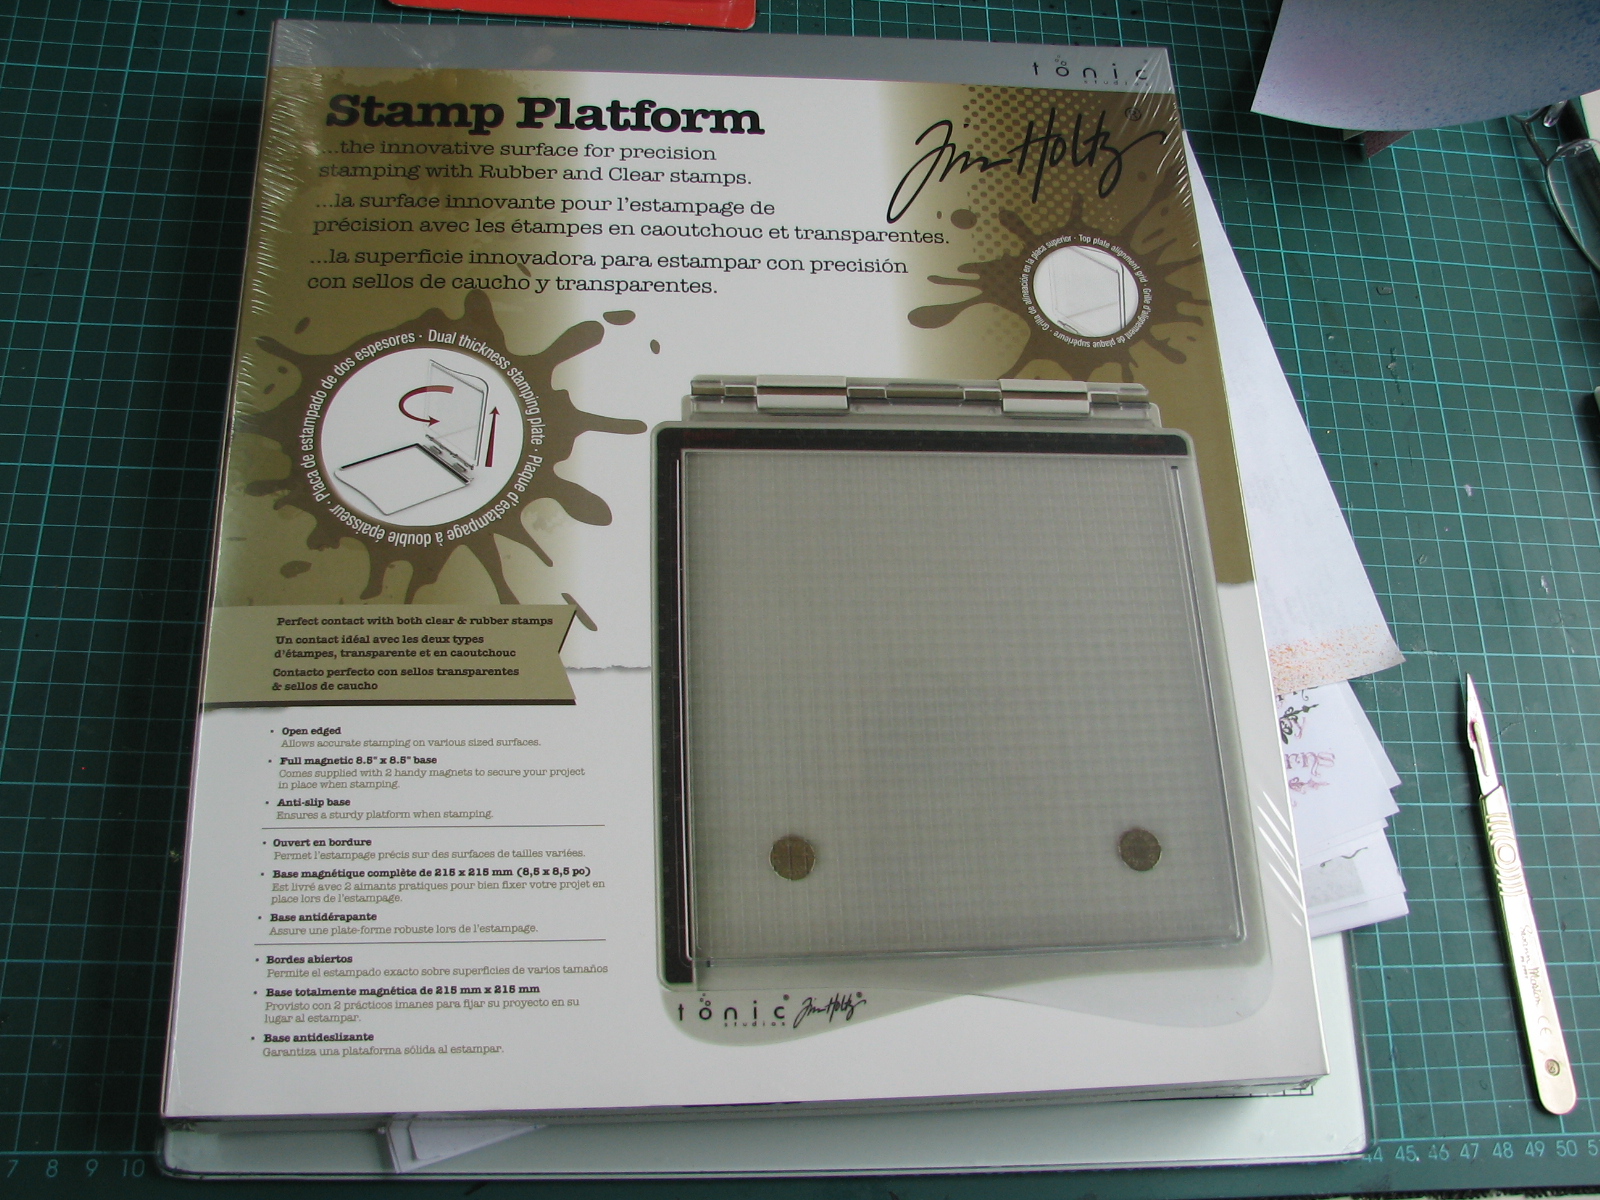 Silverwolf Cards: Here it is- The Tonic/Tim Holtz Stamping Platform